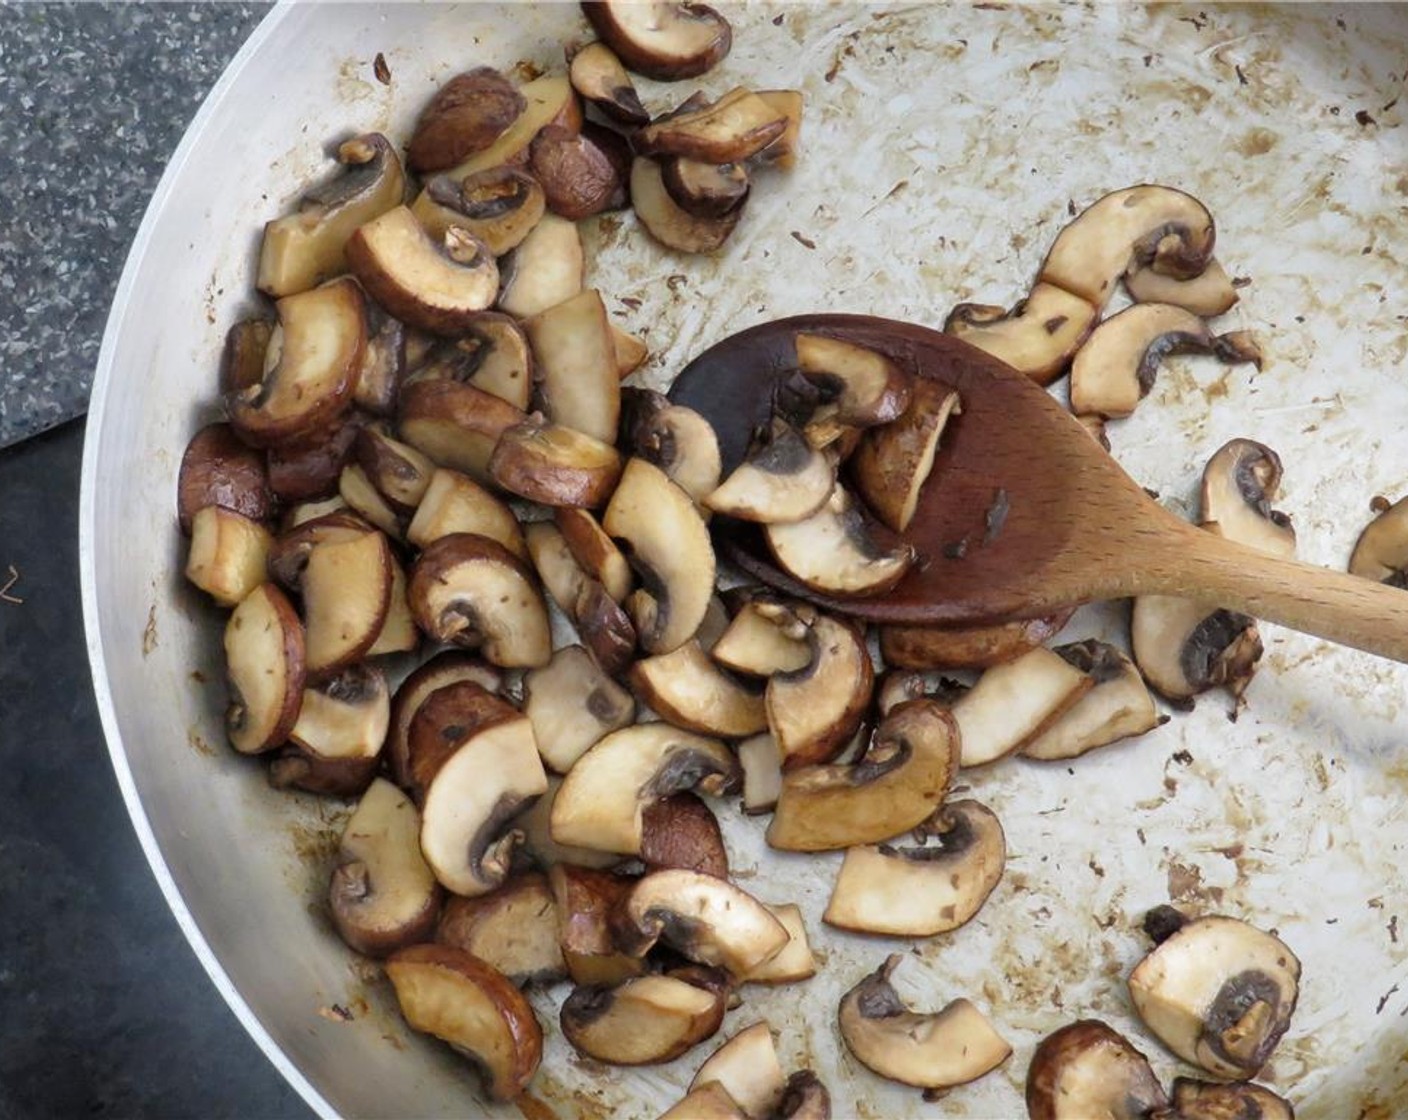 step 3 Add more Olive Oil (1 Tbsp) to the pan, and increase heat to medium high. Add baby bella mushrooms, and saute until mushrooms are browned and have given off their liquid, 5-7 minutes. Transfer the mushrooms to the shallots bowl.